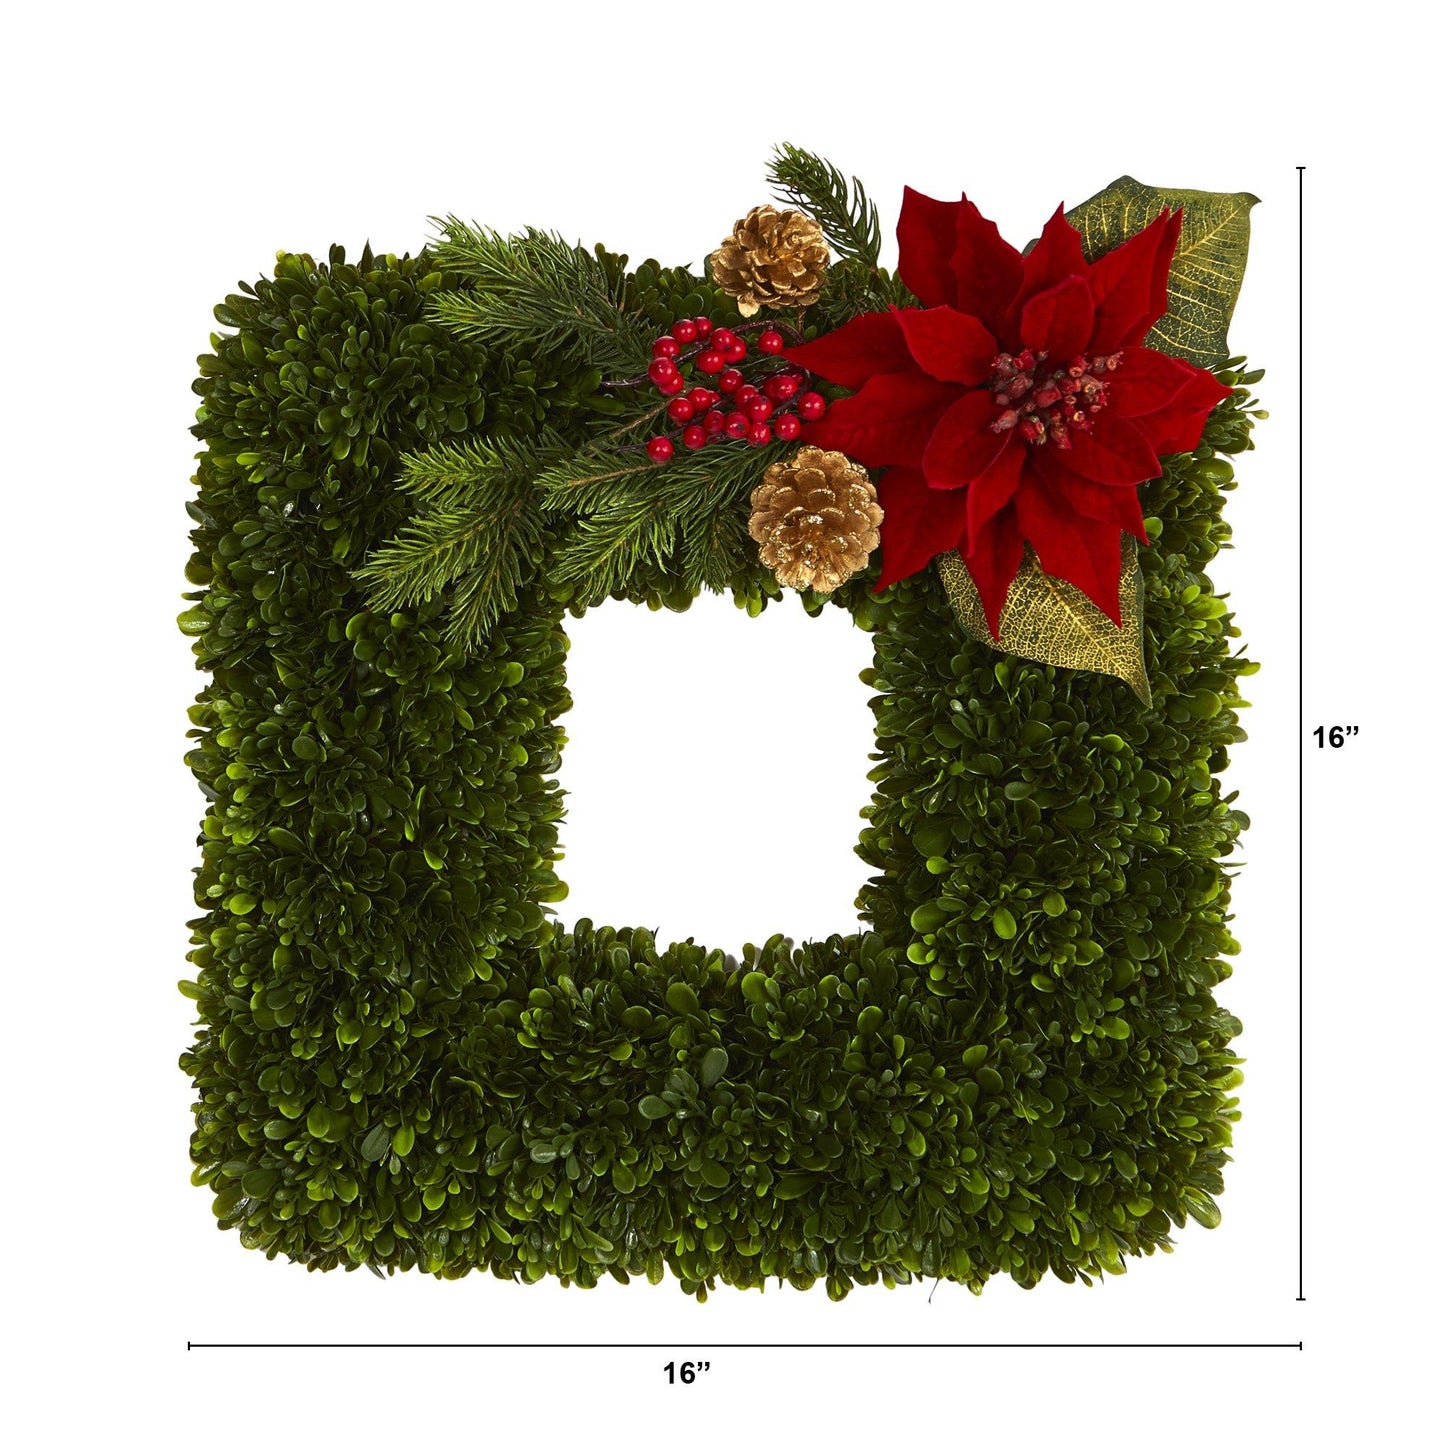 16” Tea Leaf and Poinsettia Artificial Square Wreath by Nearly Natural